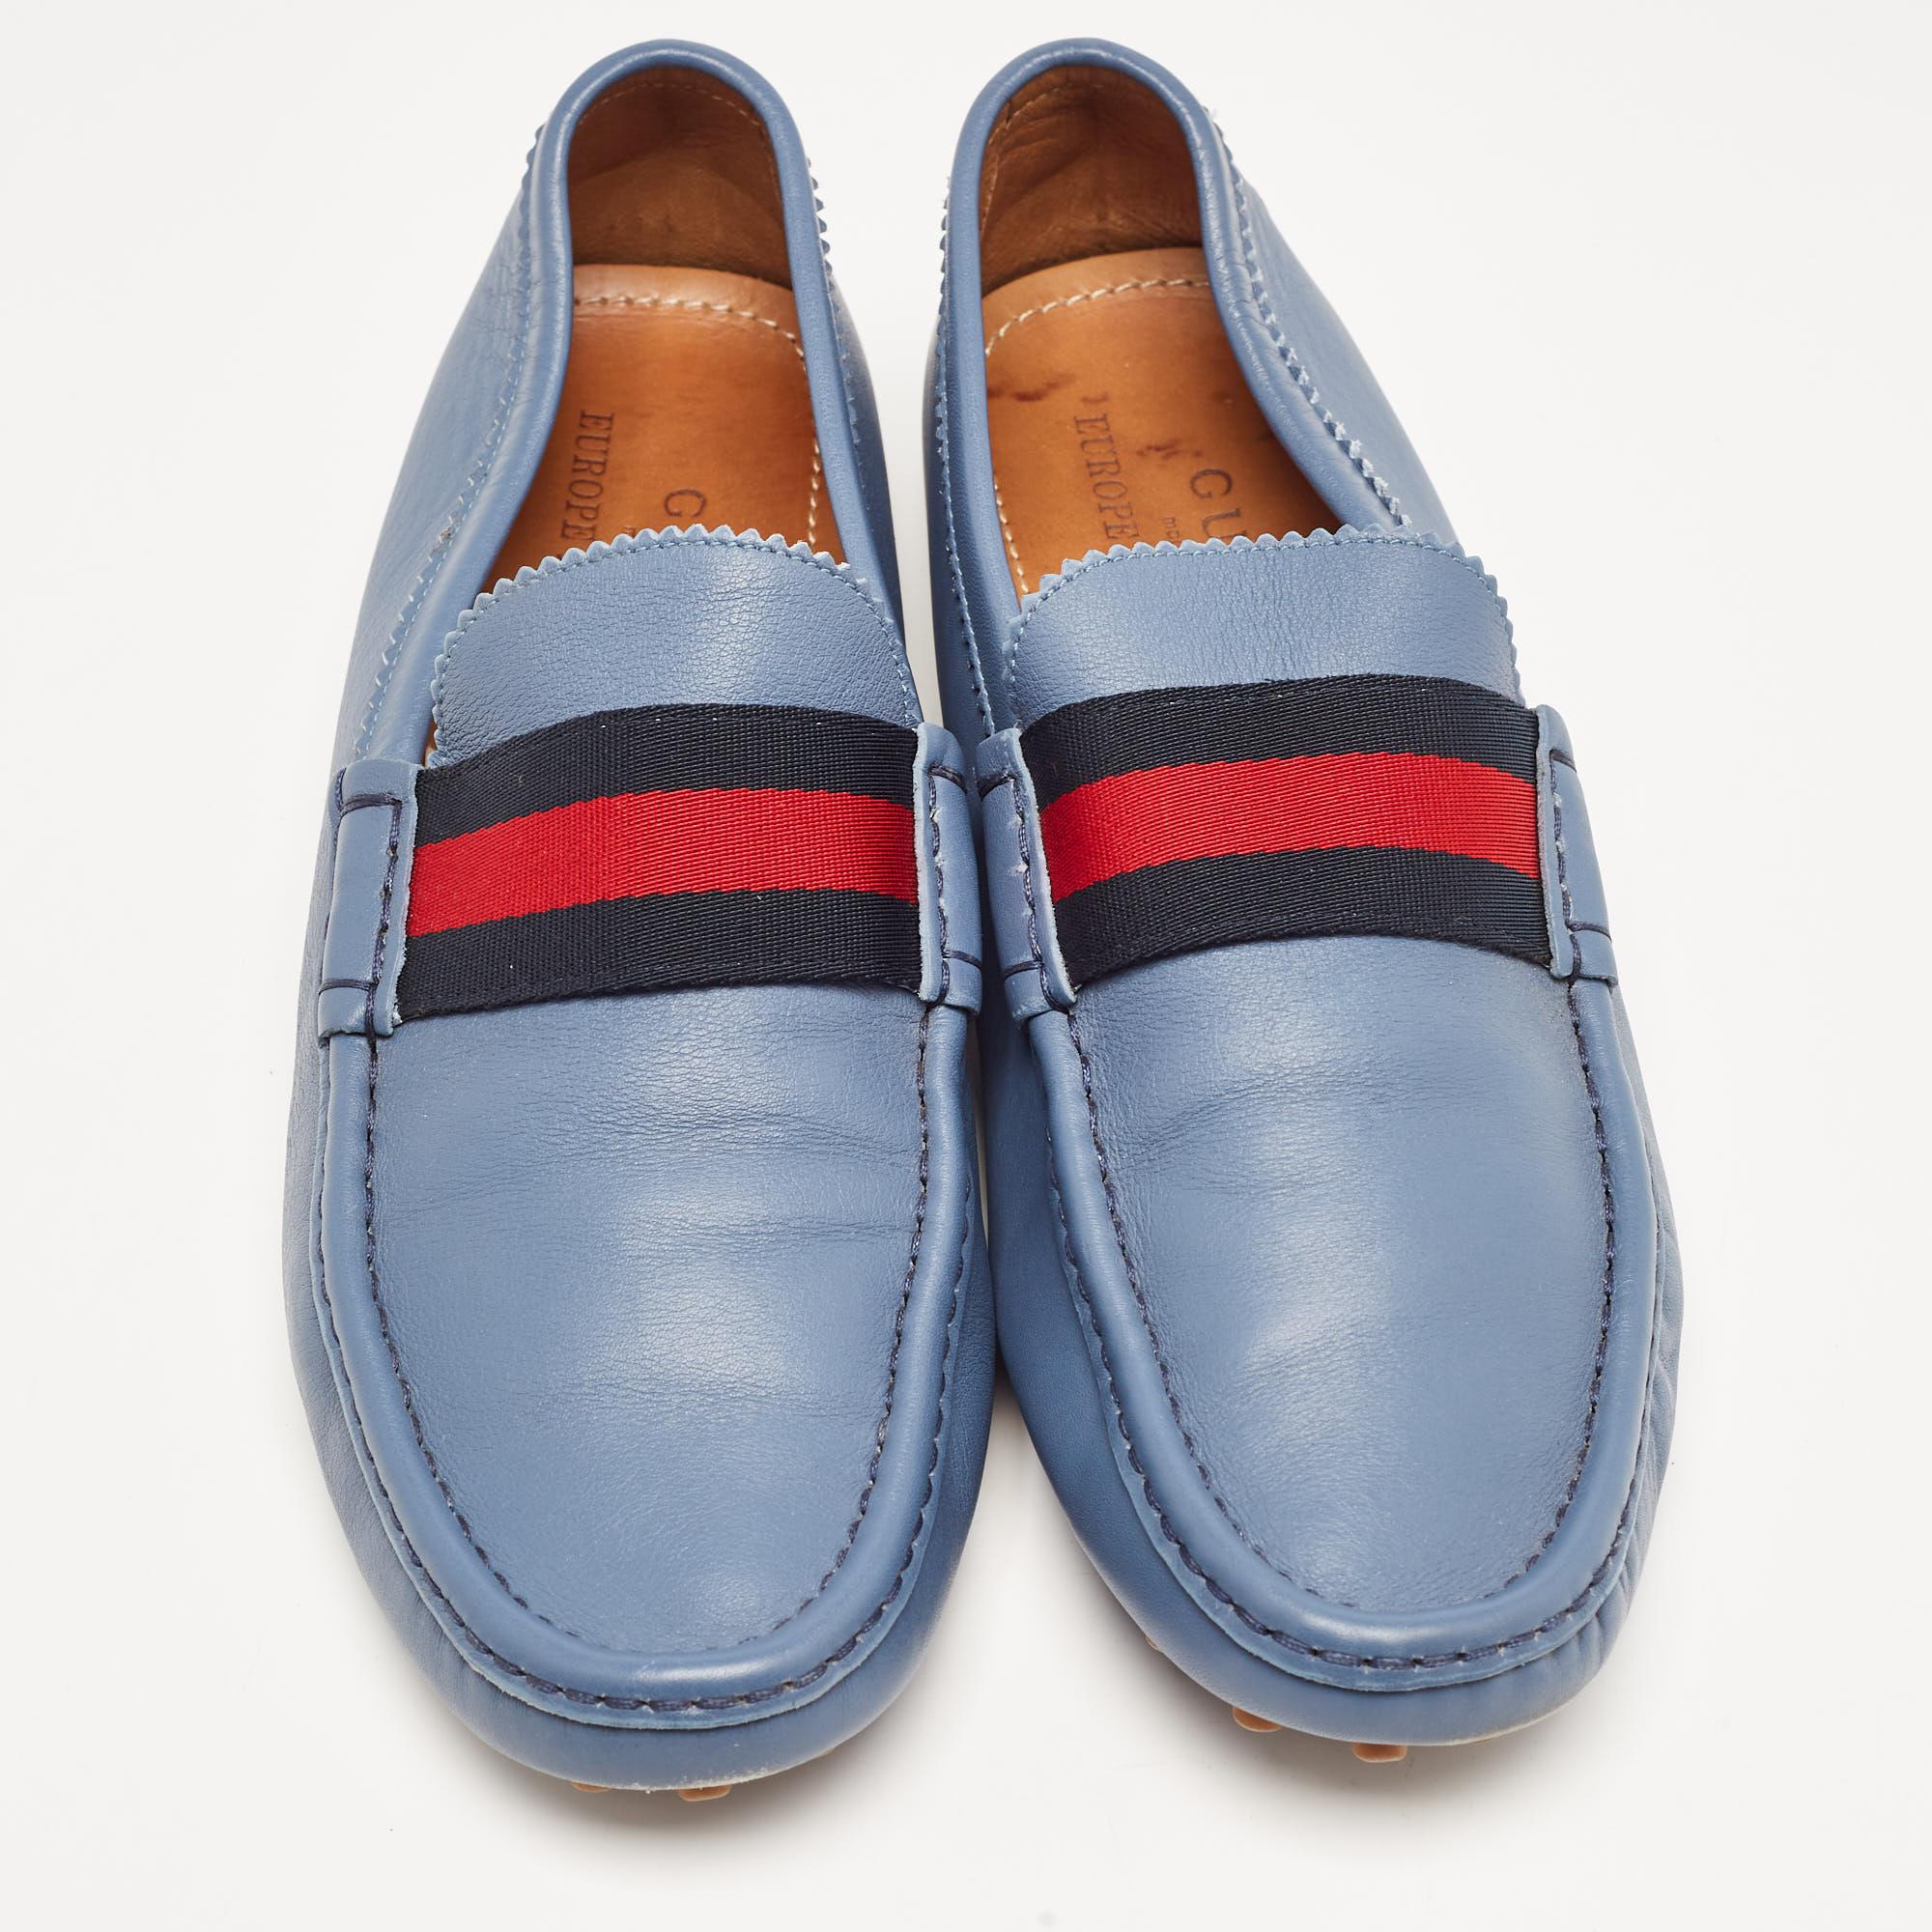 Gucci Blue Leather Web Slip On Loafers Size 43.5